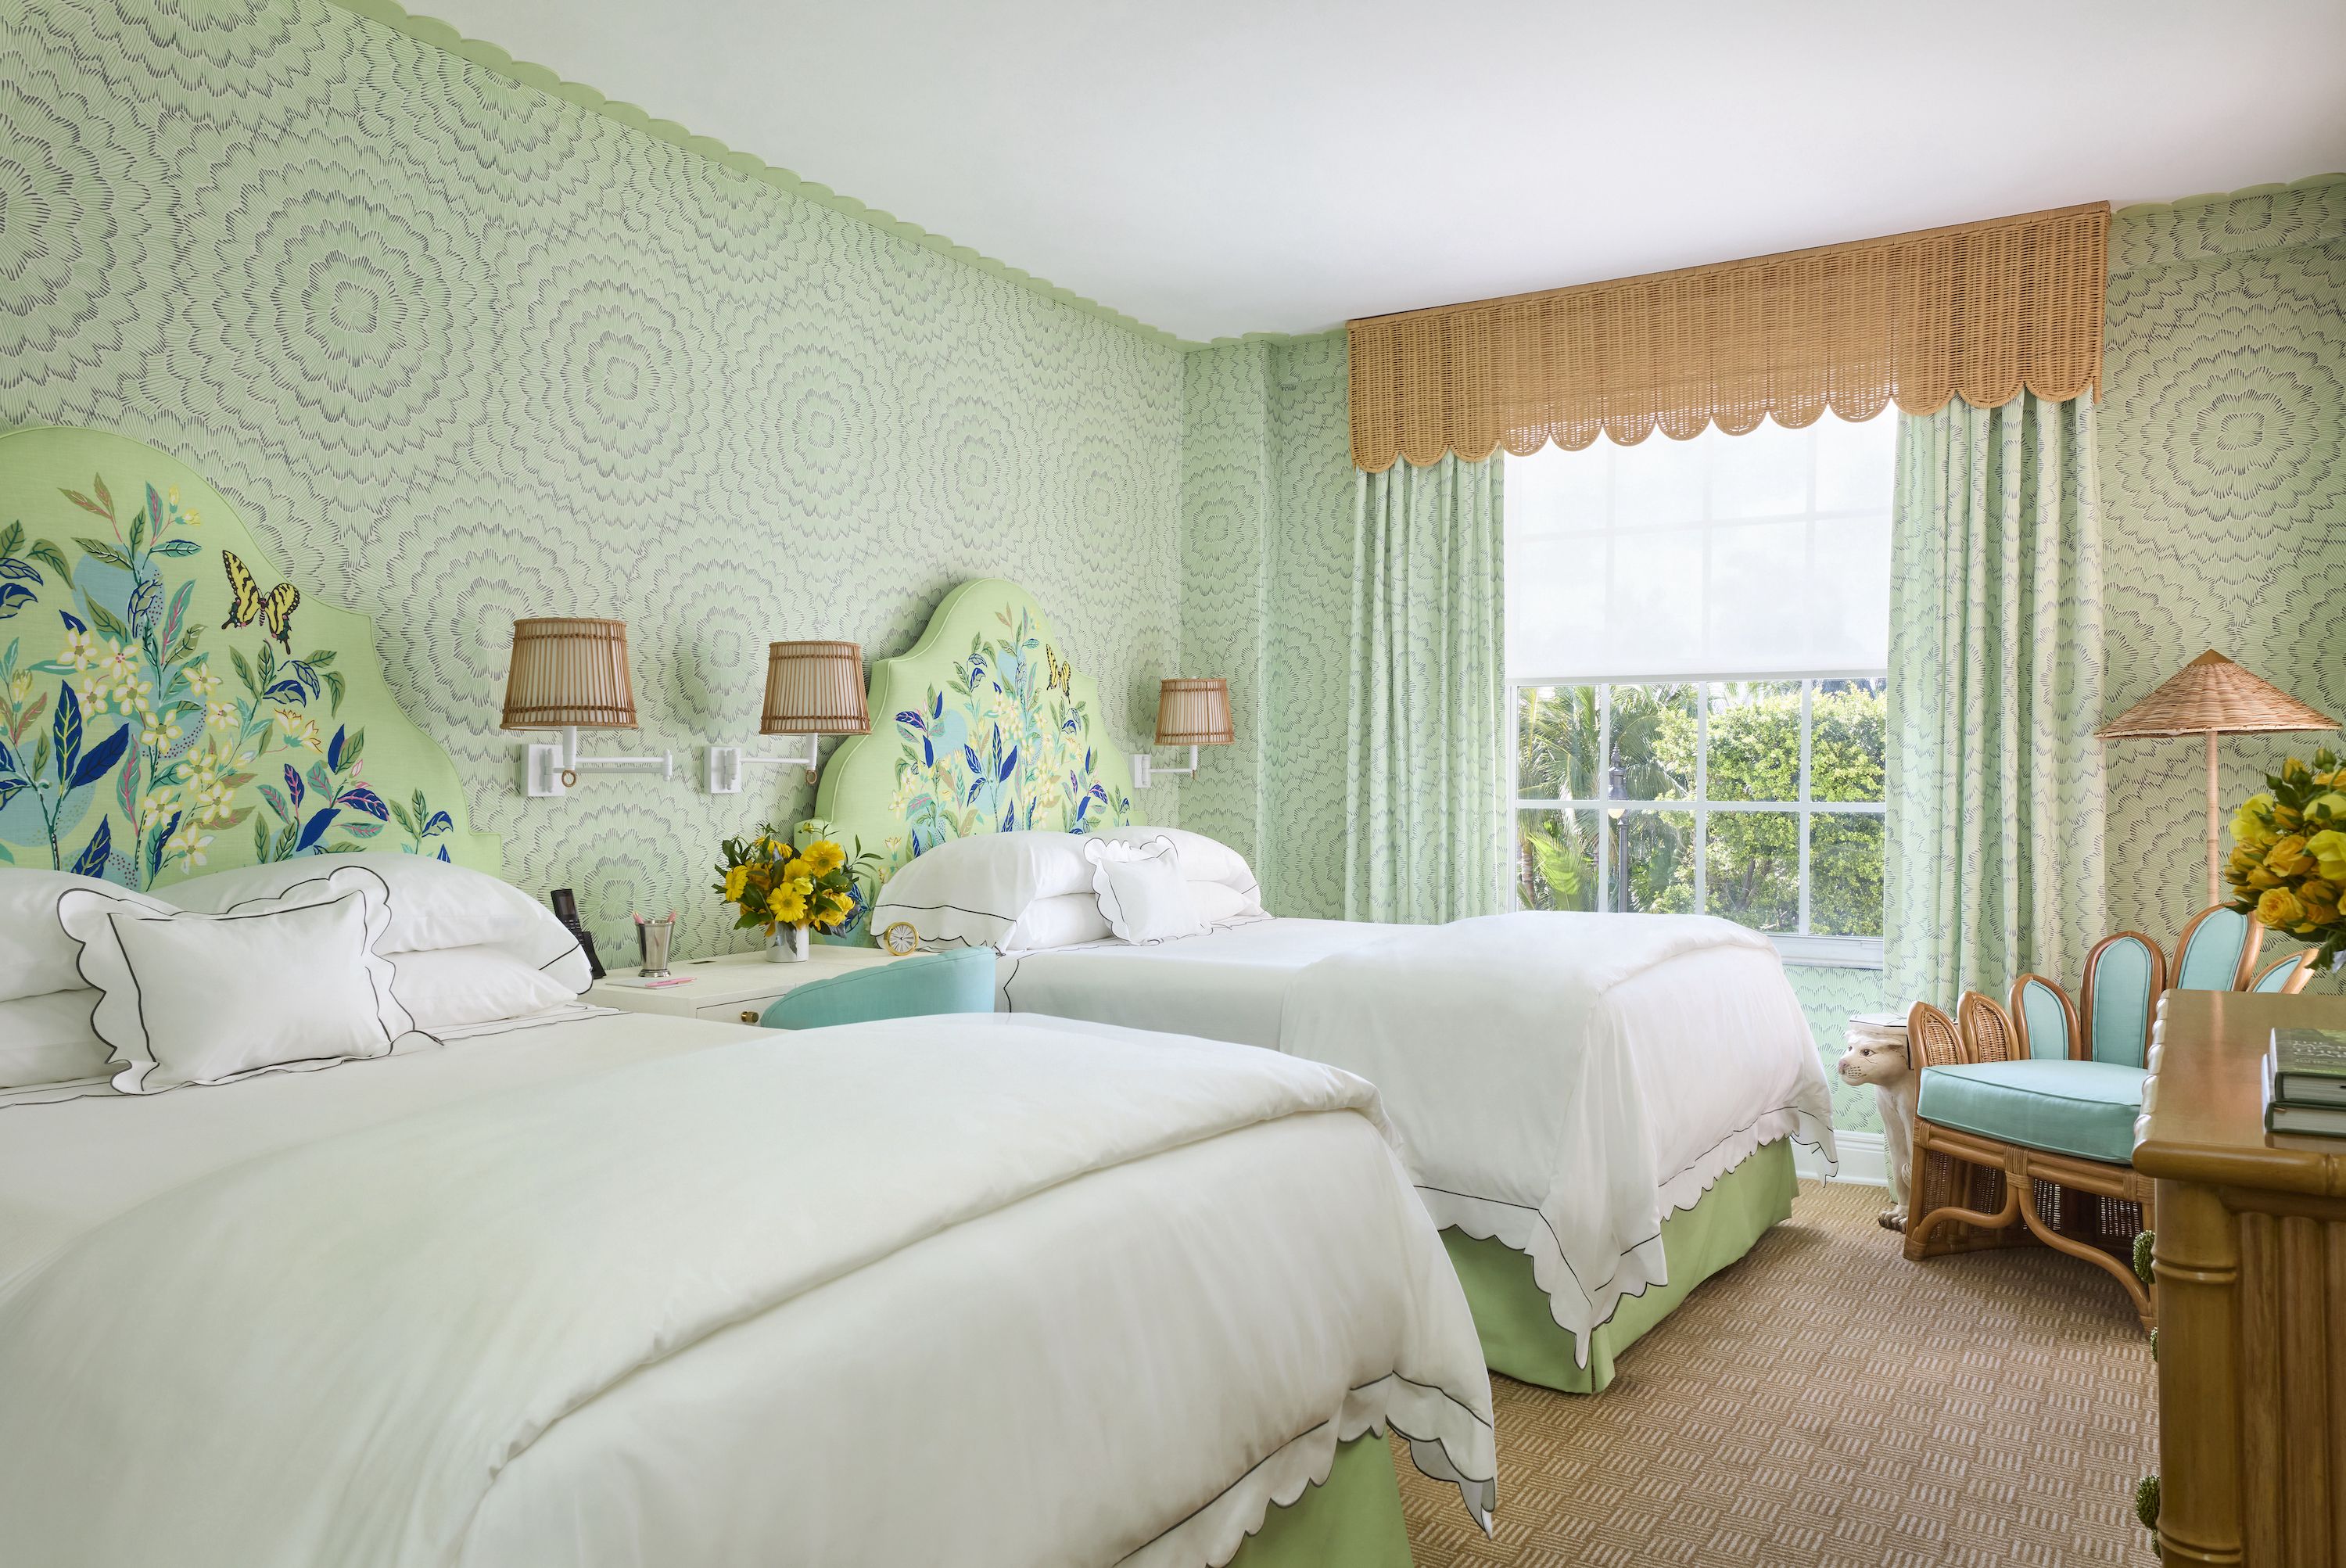 Inside the Colony Hotels Pastel Makeover